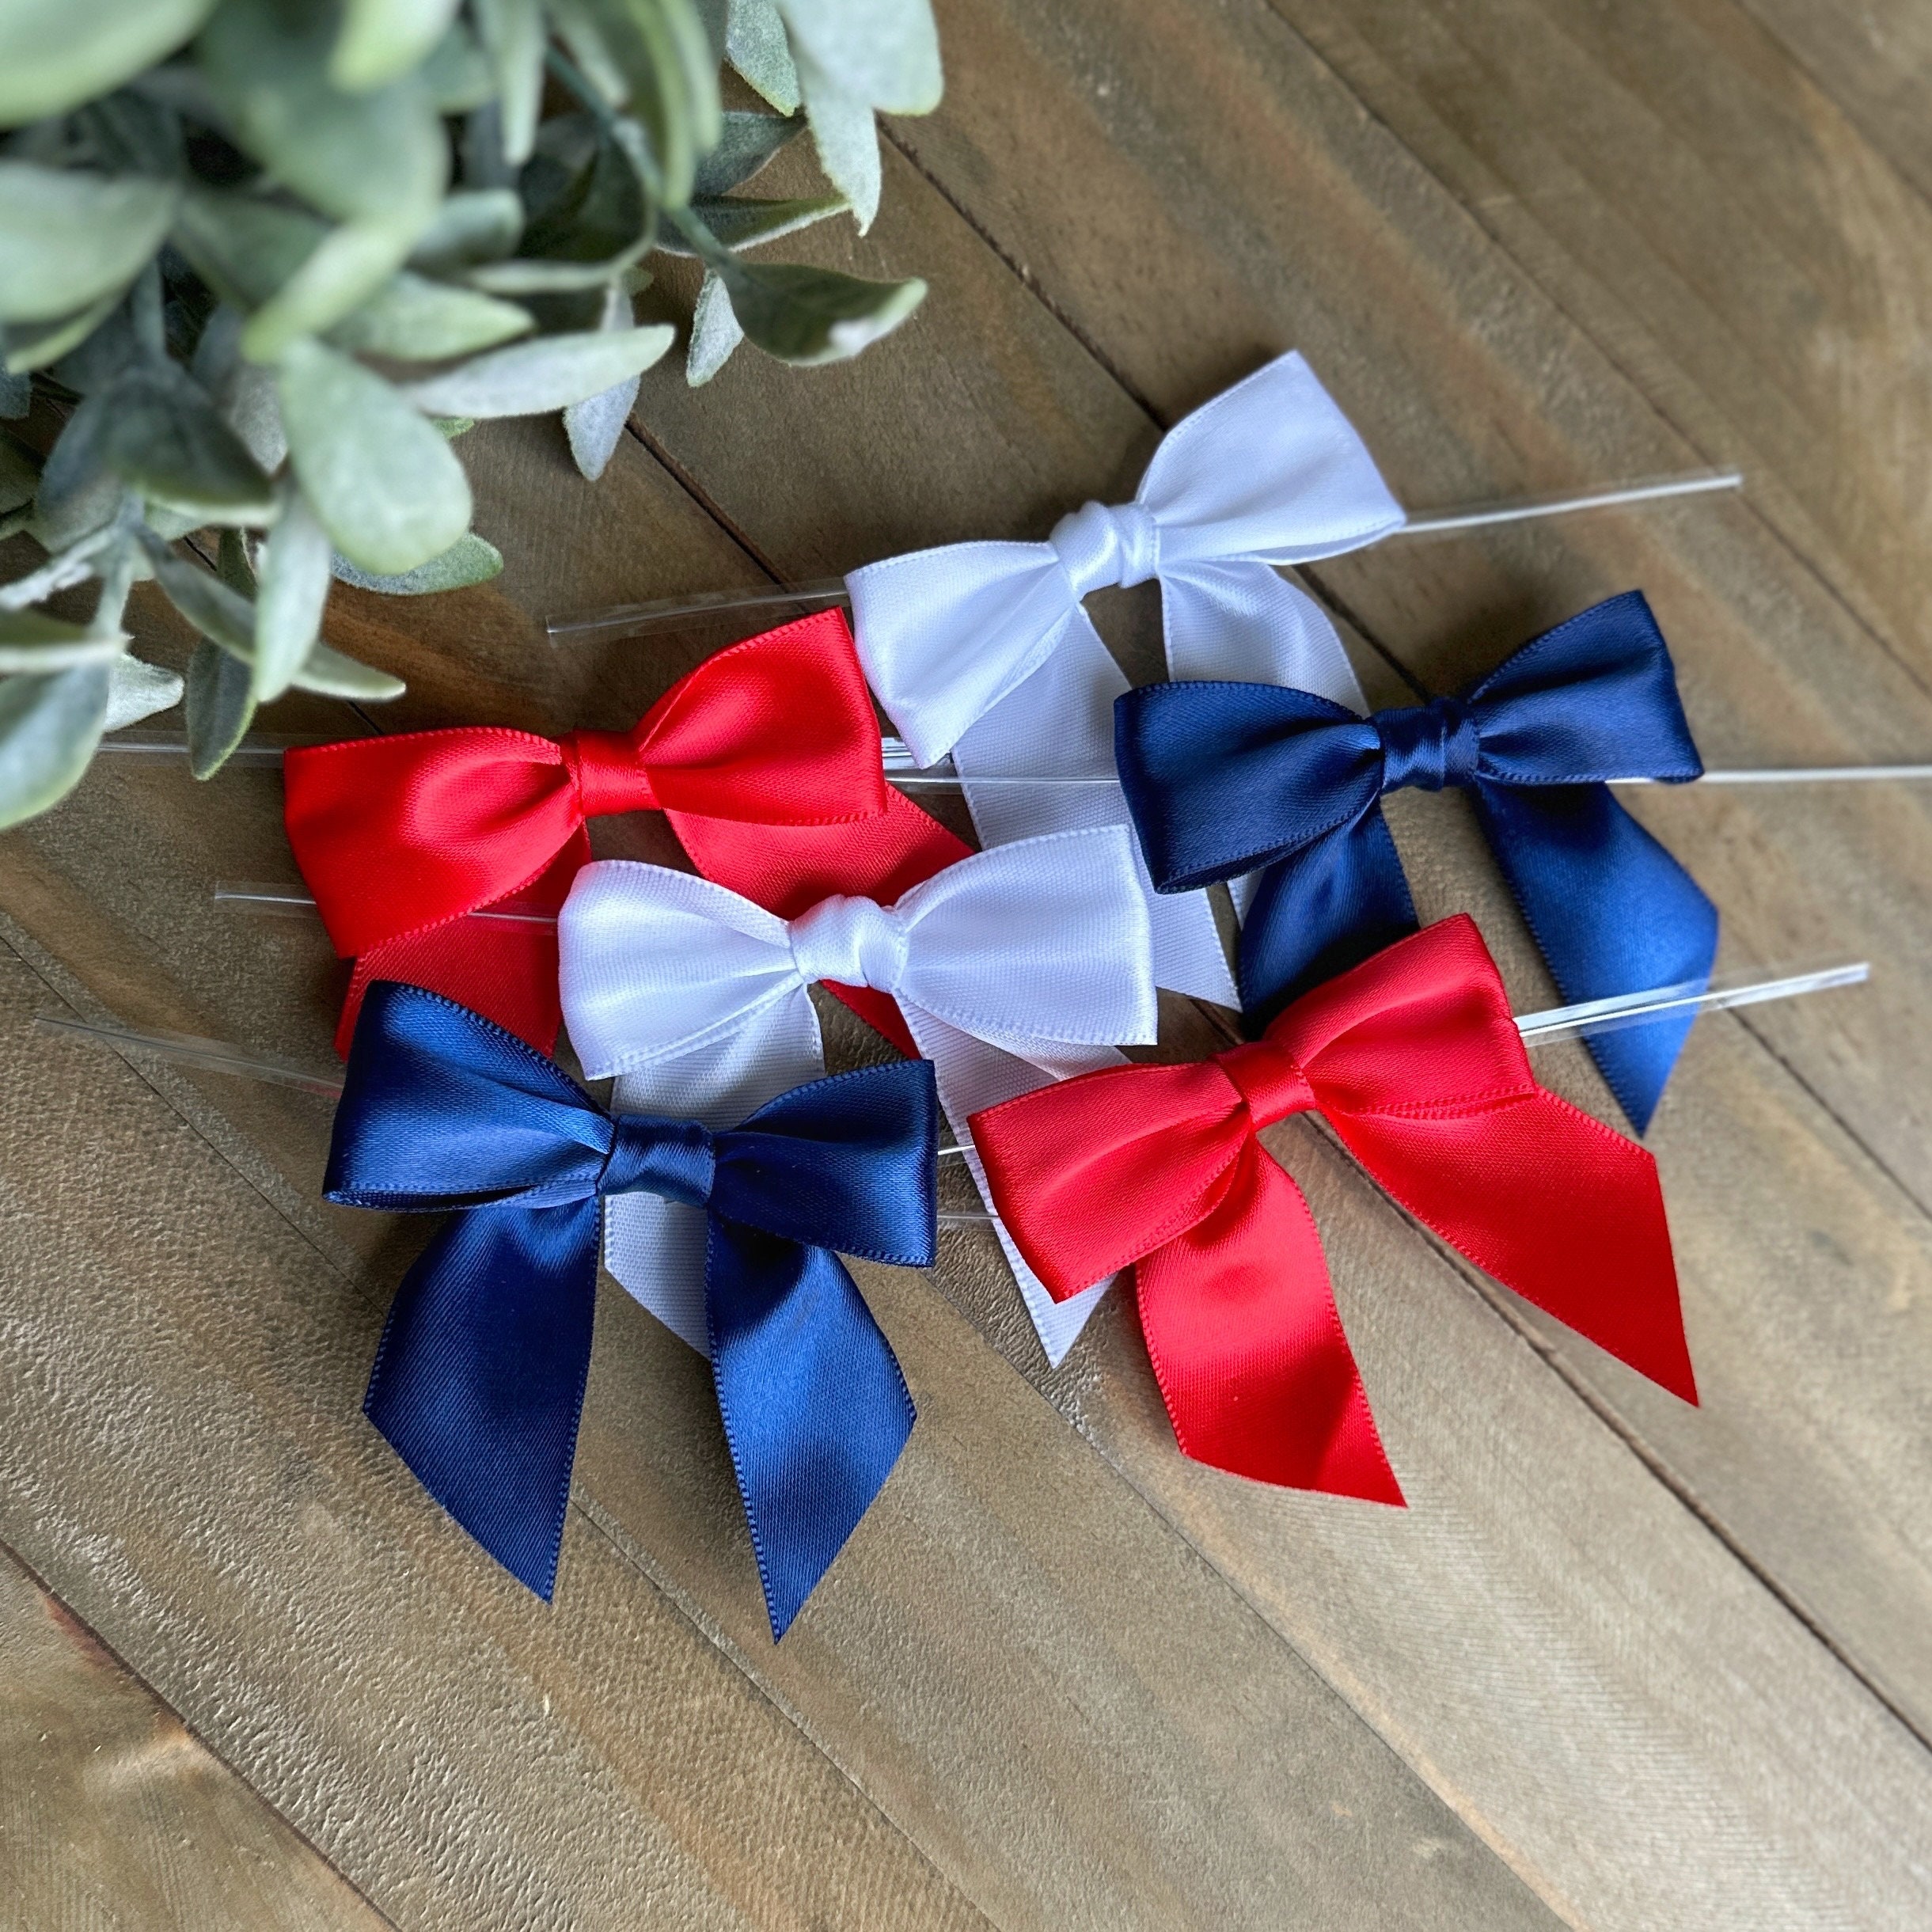 NAVY BLUE Satin Pre-tied Bow, 3 Bow, 4 Twist Tie, 7/8 Ribbon - Pack of  50 Bows